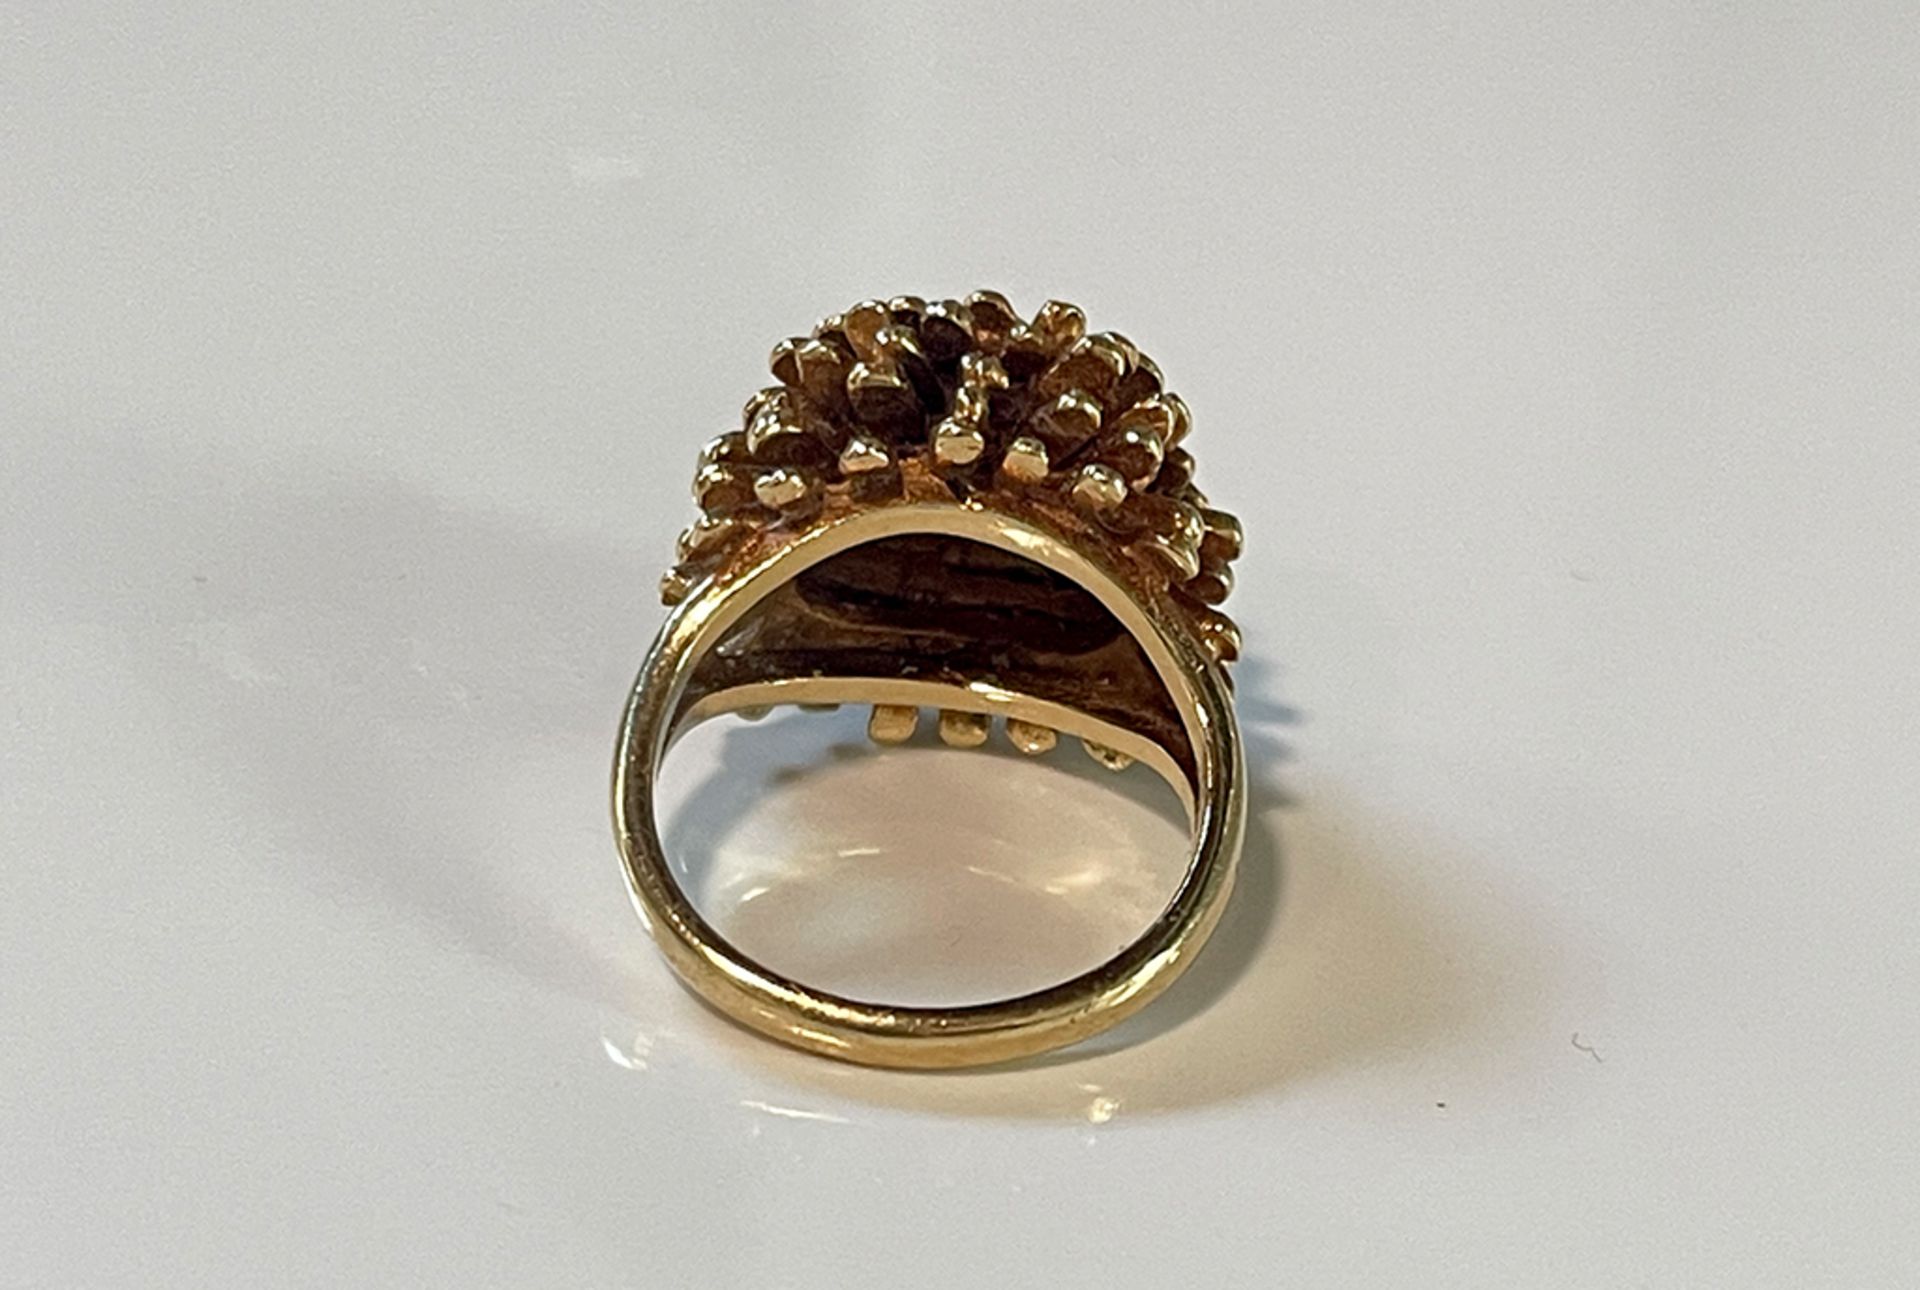 14K Gold ring in form of a flower - Image 5 of 5